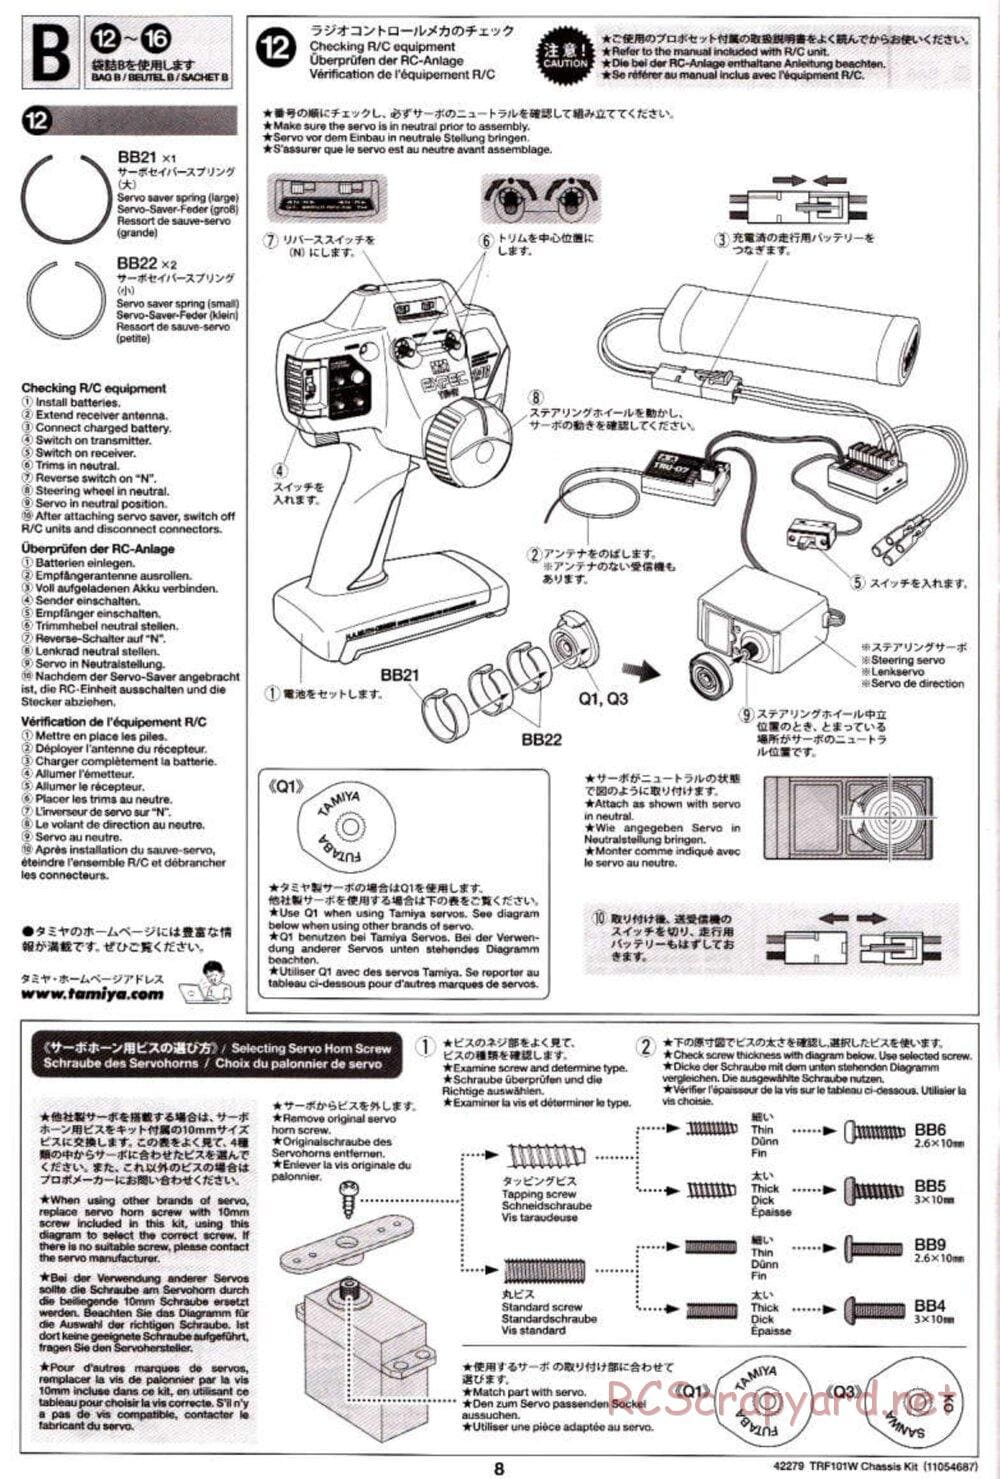 Tamiya - TRF101W Chassis Chassis - Manual - Page 8